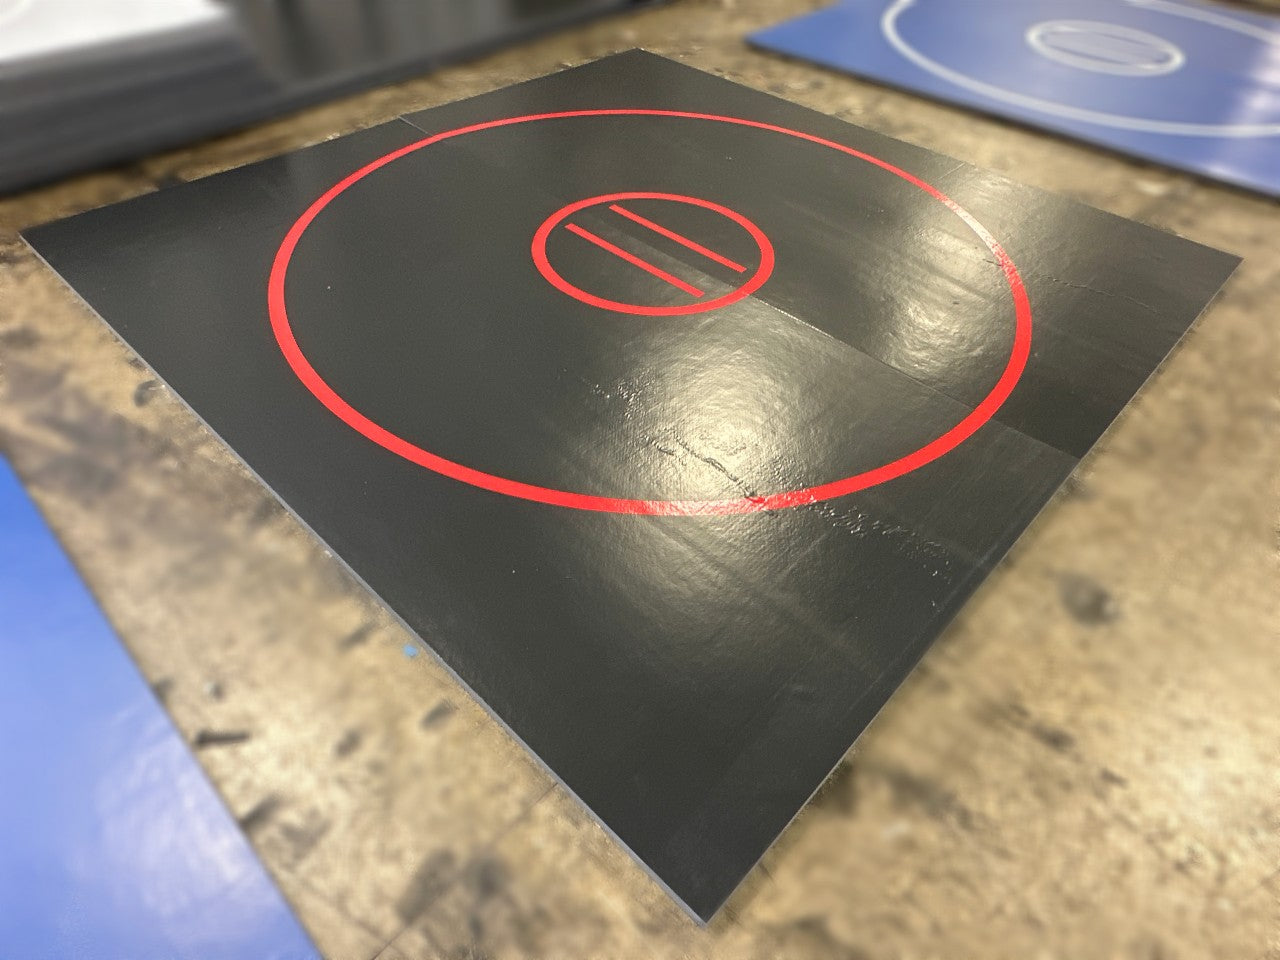 Clearance Wrestling Mat 12' x 12' x 1 3/8" Roll-Up Mat Black with Red Circles